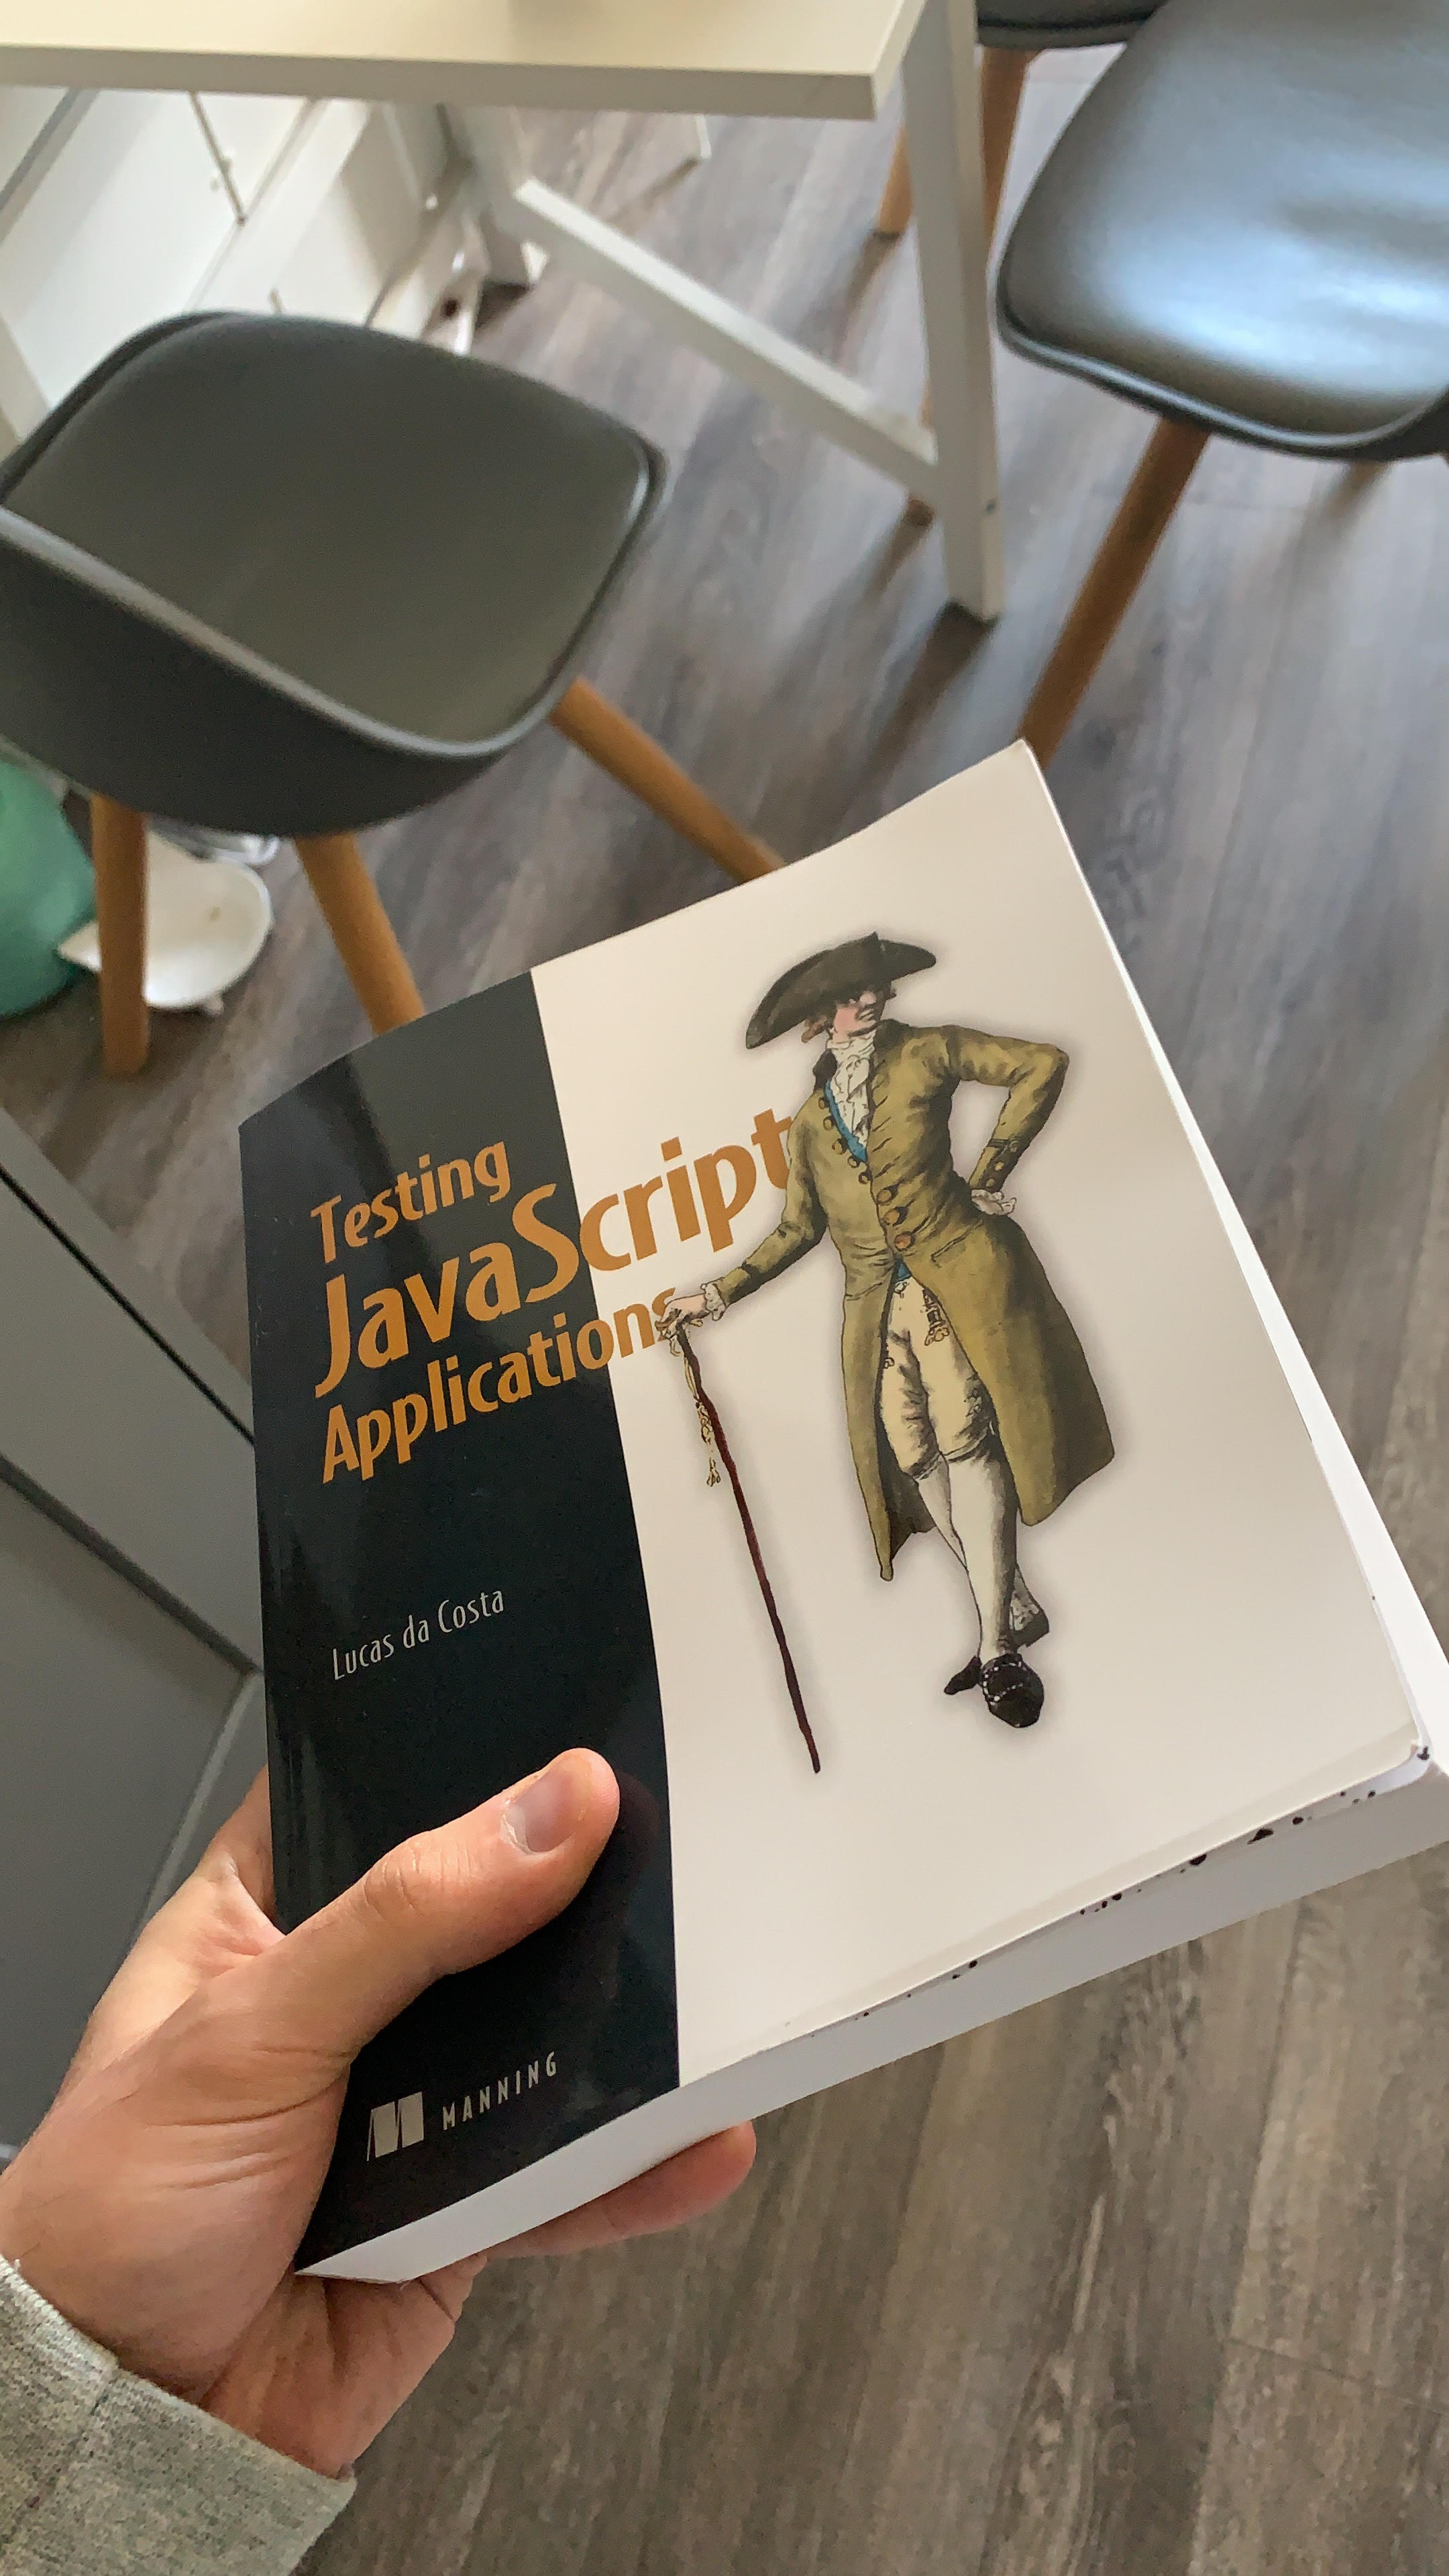 A picture of my hand holding the book I had written, called Testing JavaScript applications.